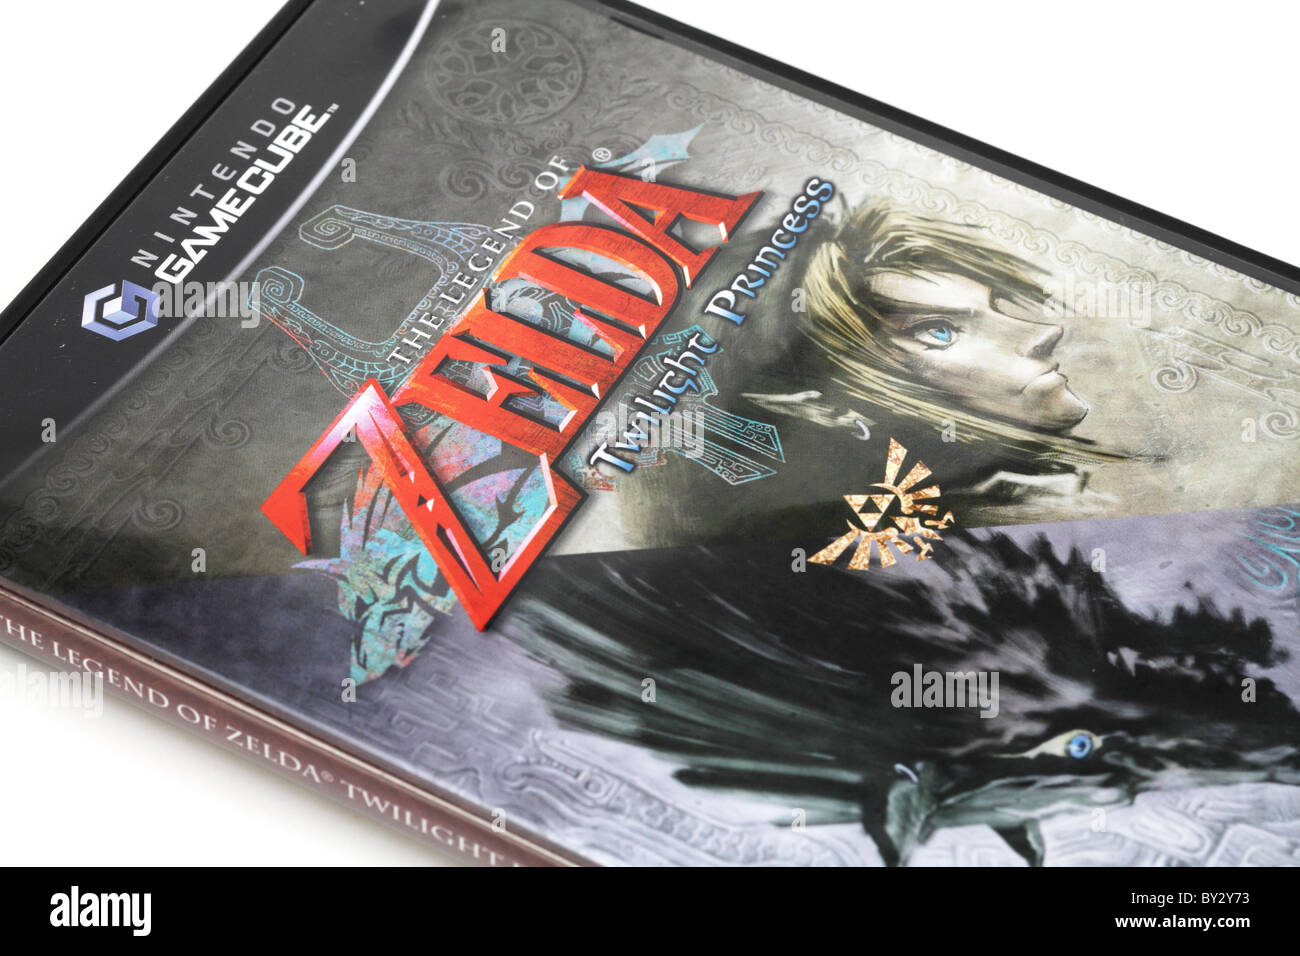 Nintendo Gamecube 'Legend of Zelda' computer disc case. (For editorial use only). Stock Photo